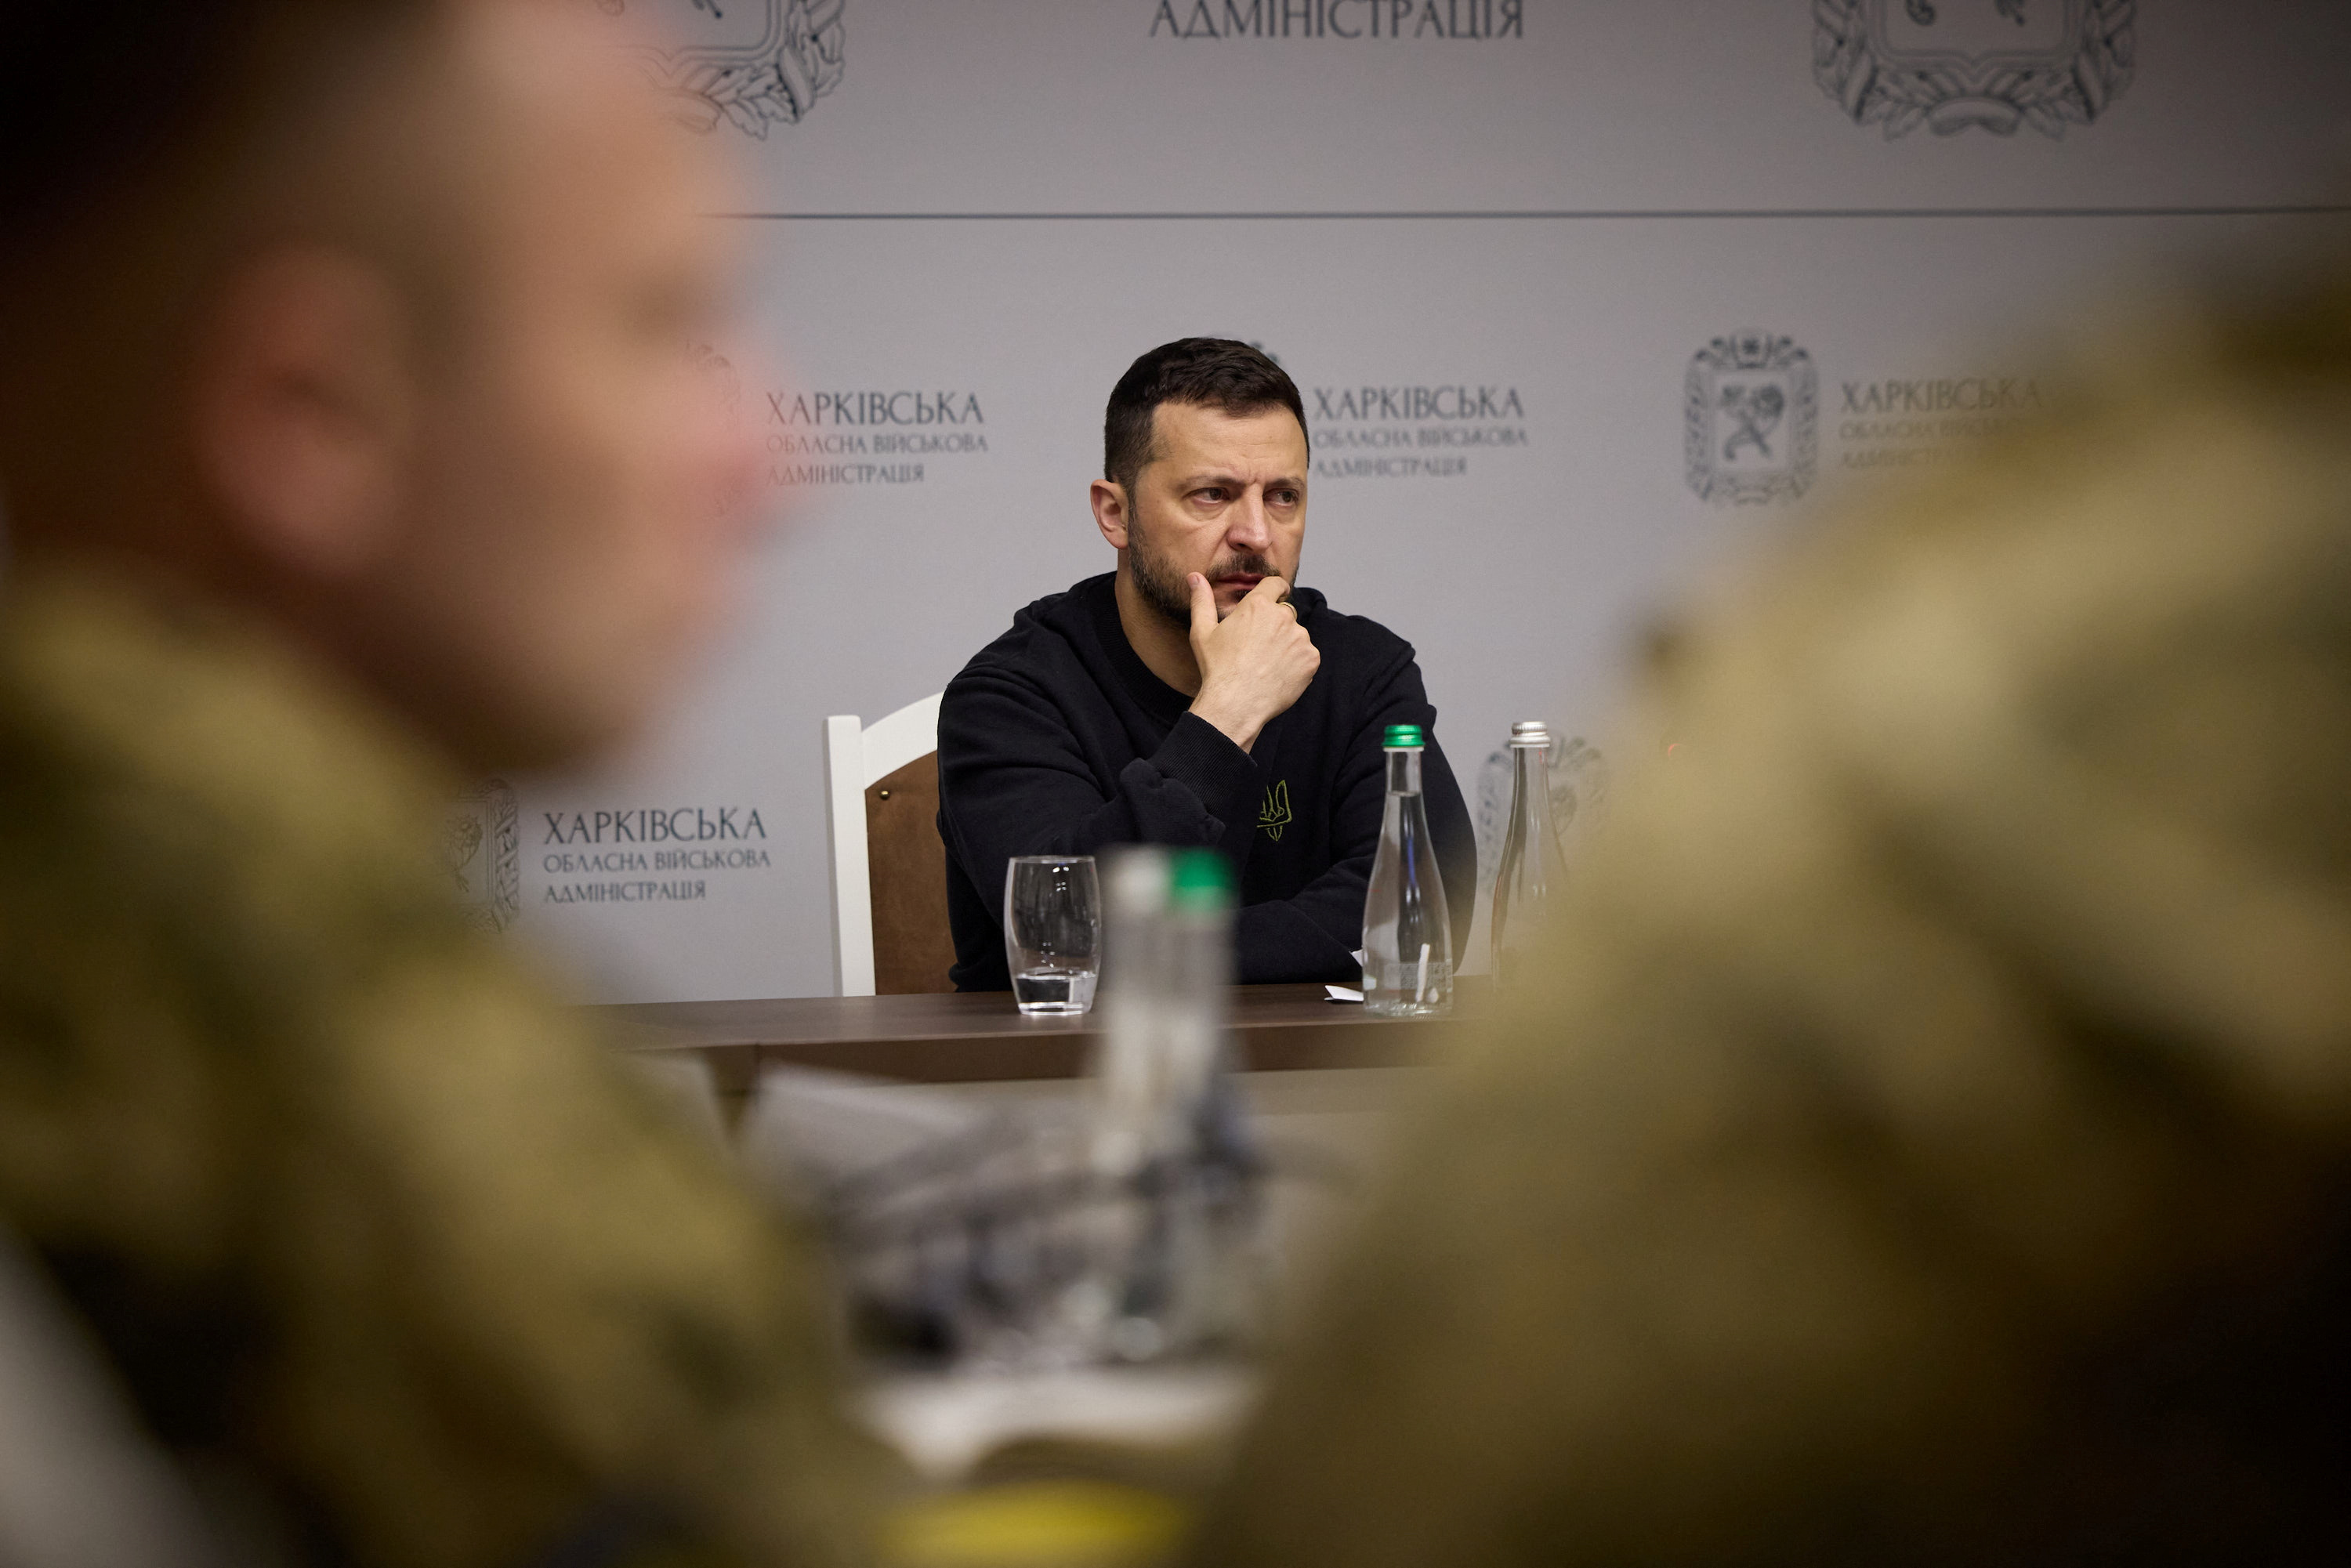 Ukraine's President Zelenskiy attends a meeting with top military officials in Kharkiv